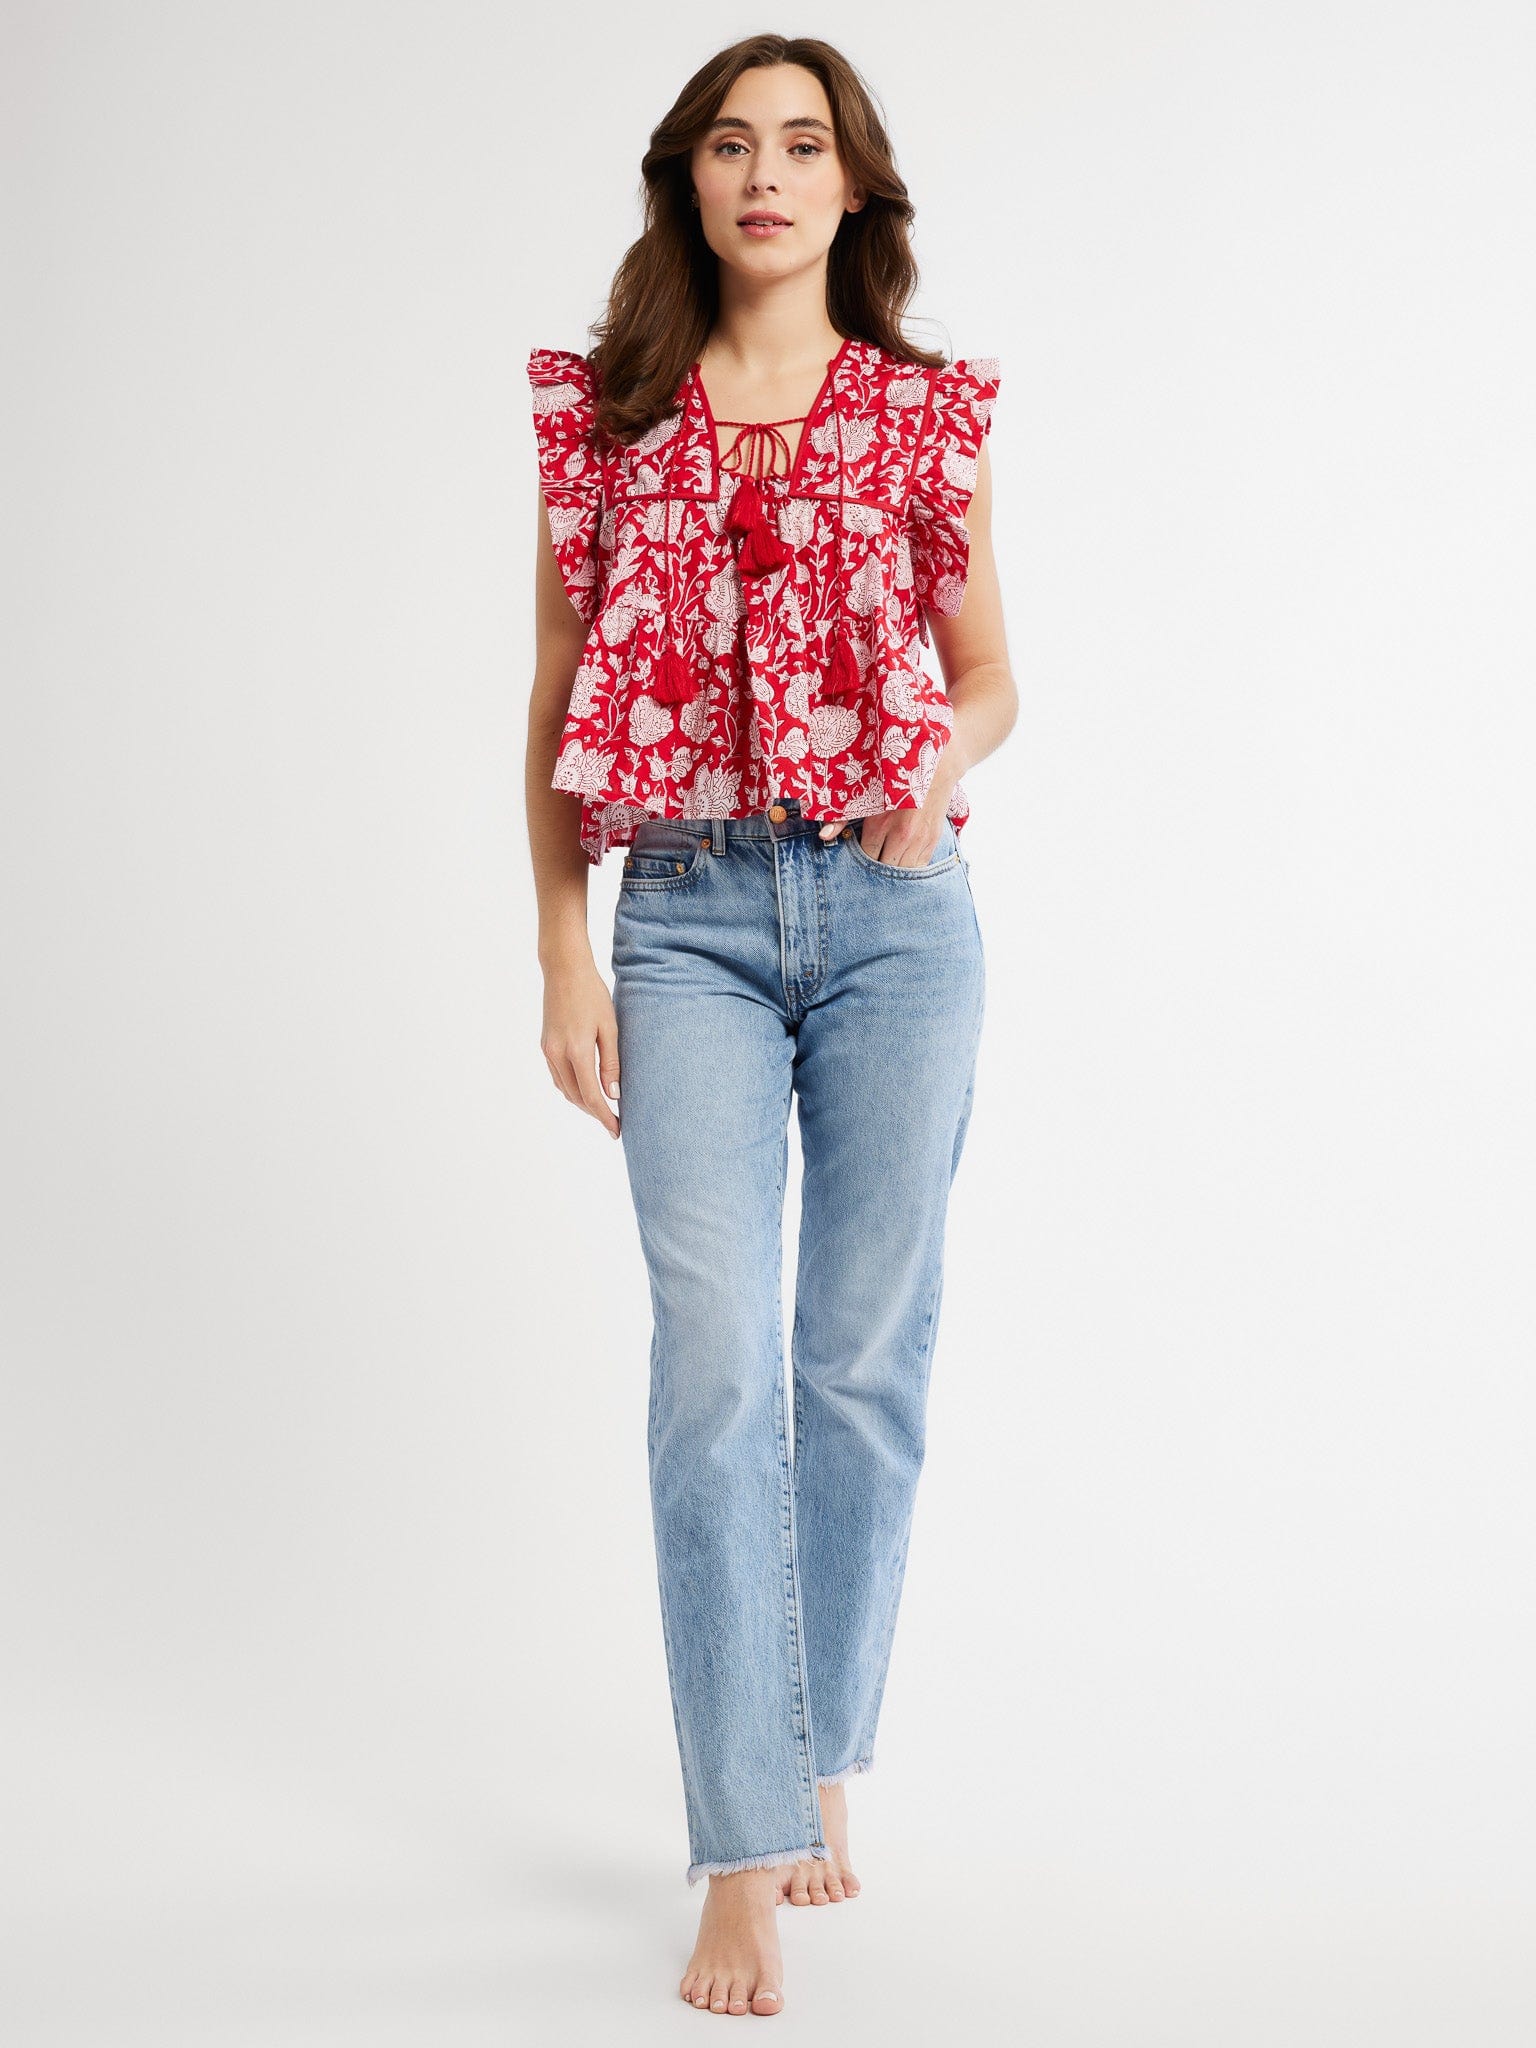 MILLE Clothing Chelsea Top in Red Zinnia